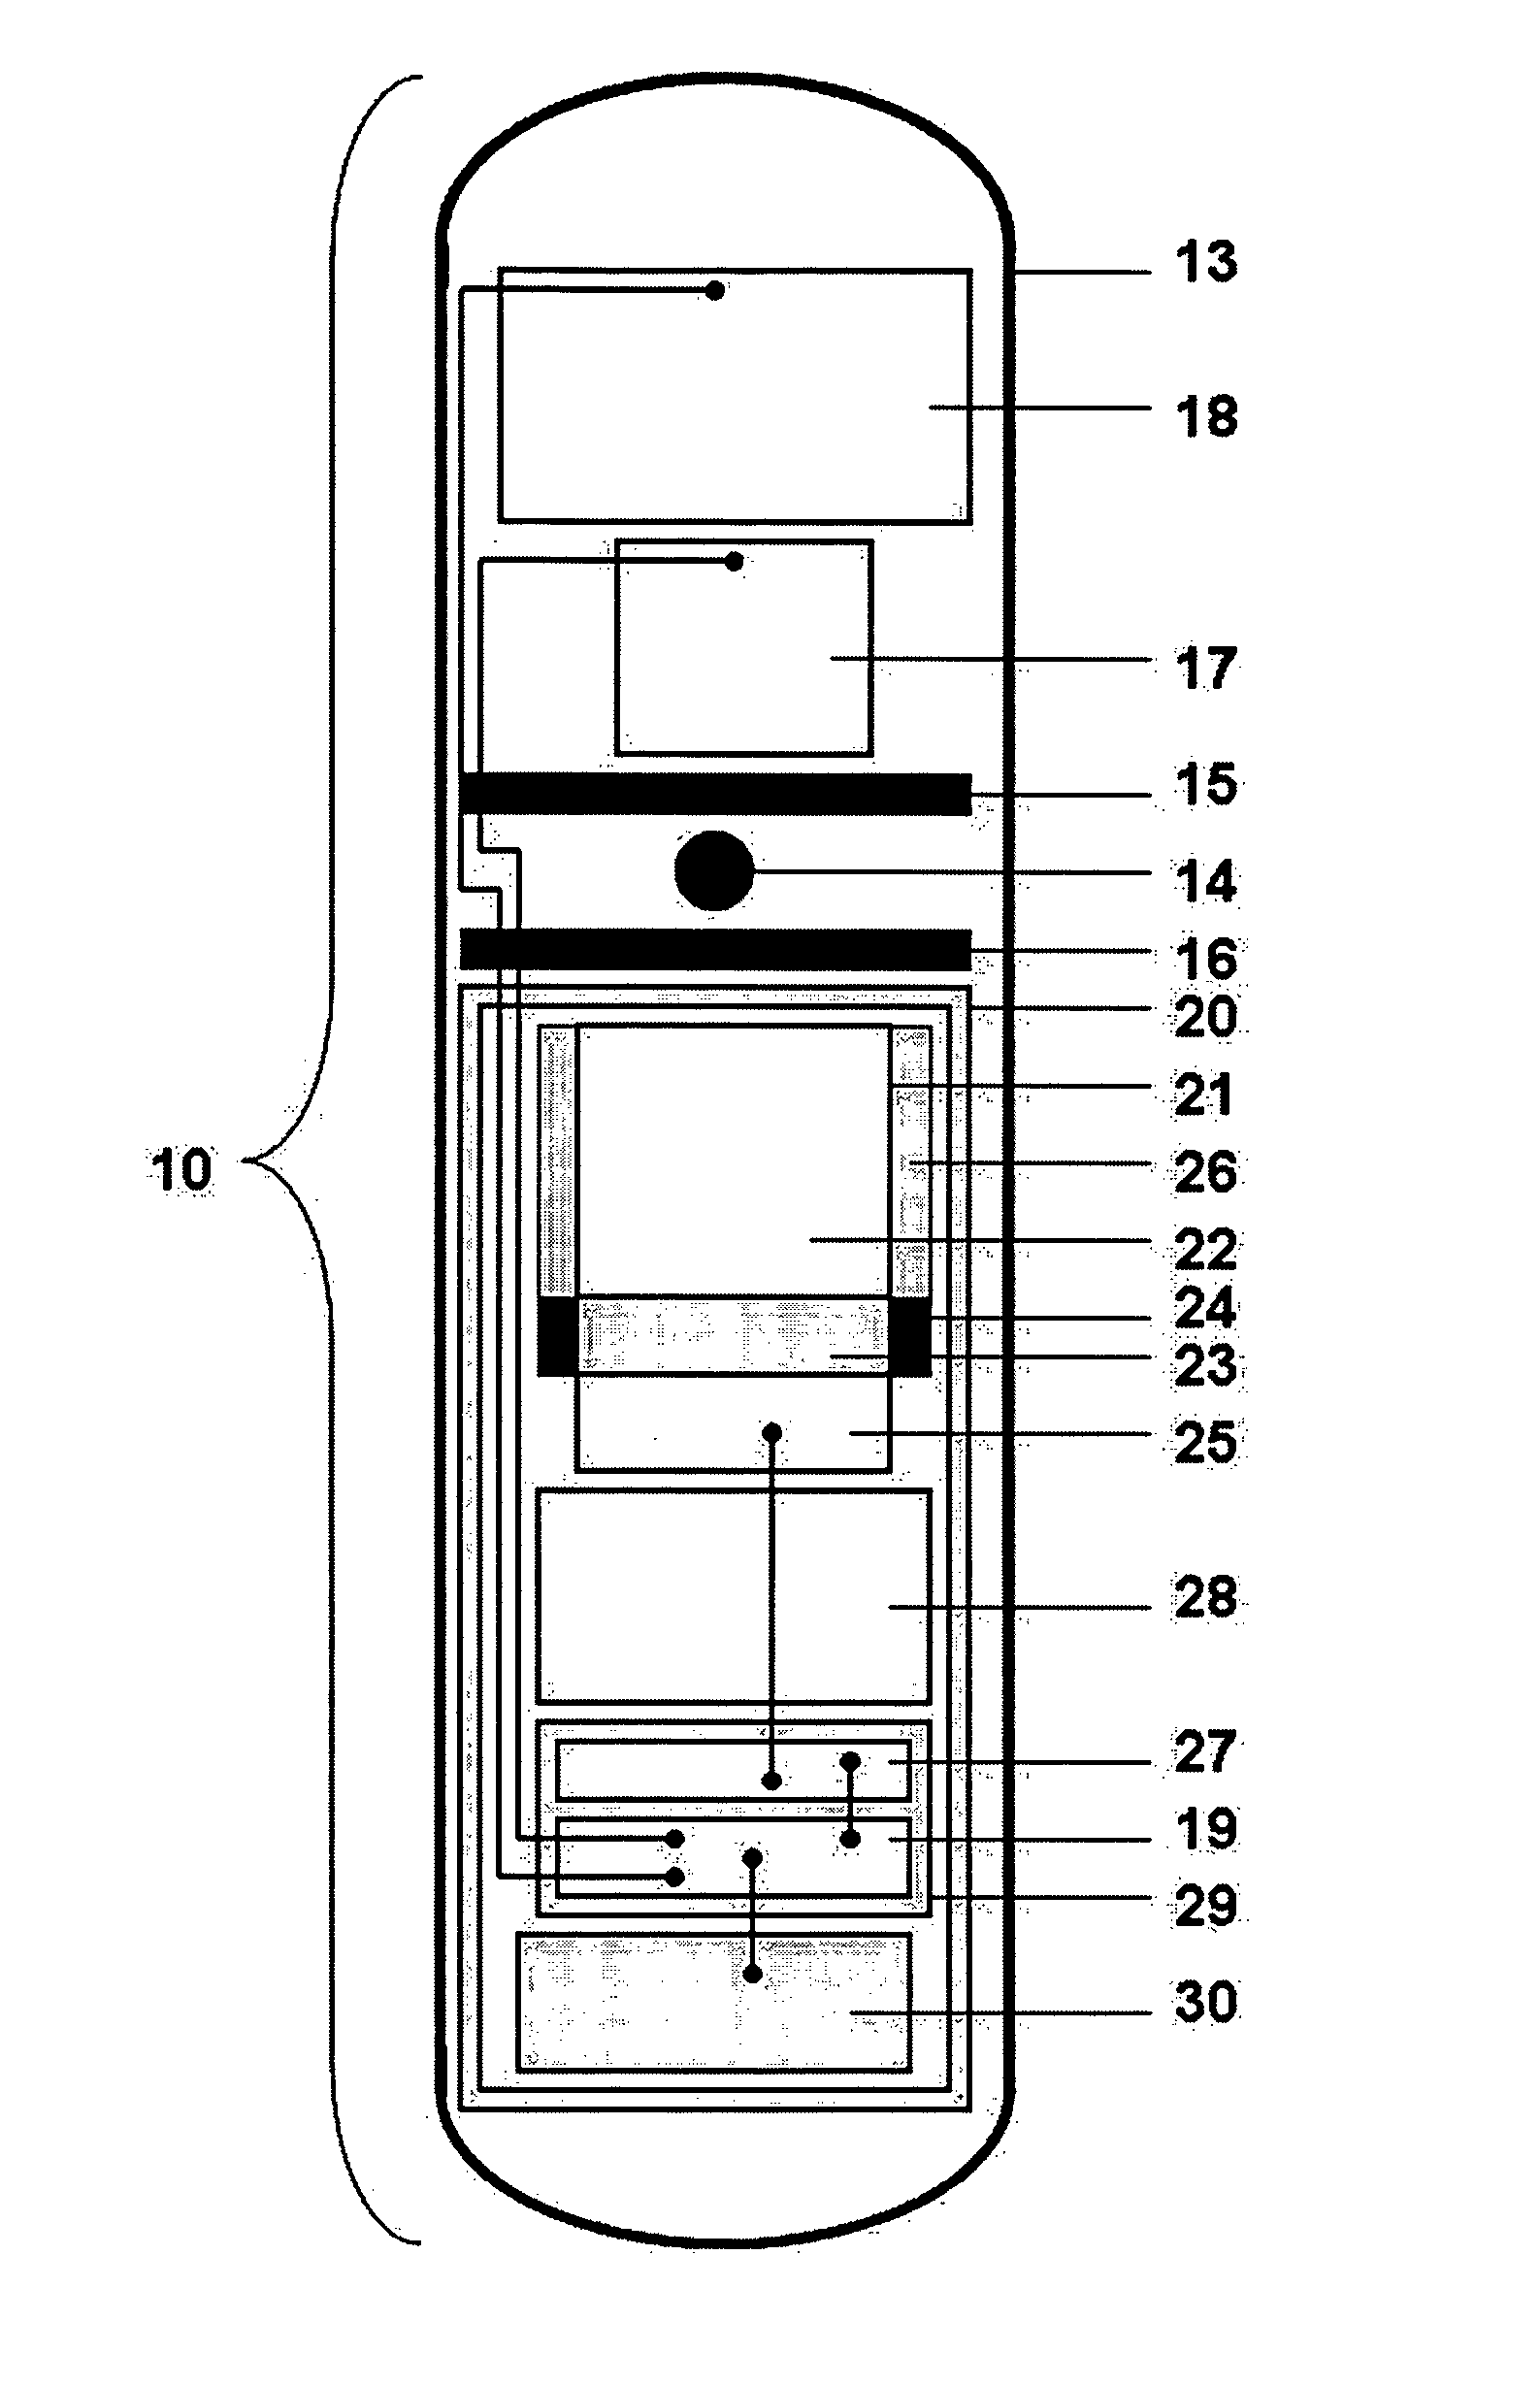 Irradiated formation tool (IFT) apparatus and method